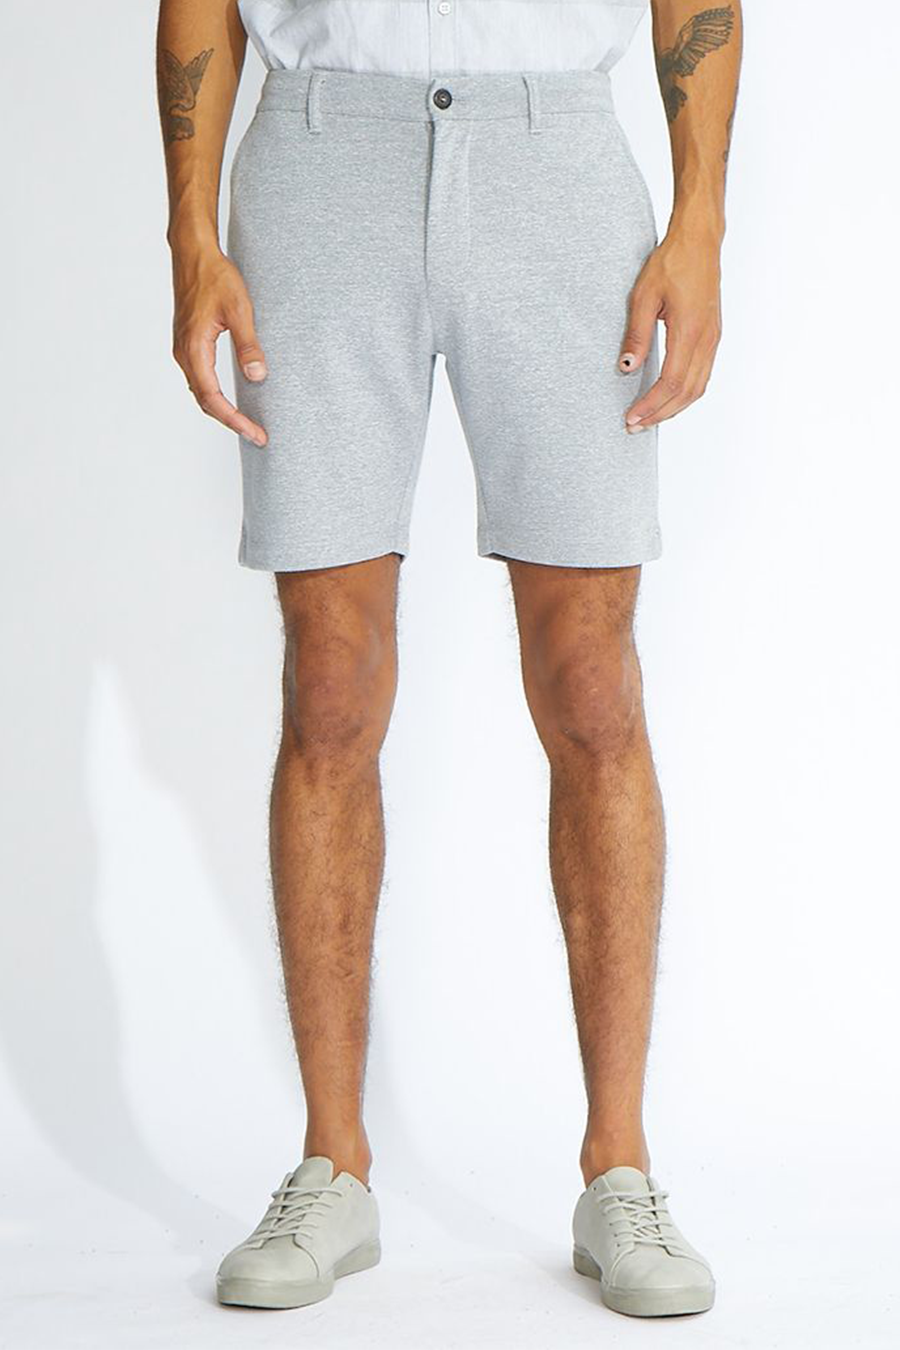 Hart Knit Shorts | Heather Gray - Main Image Number 1 of 1